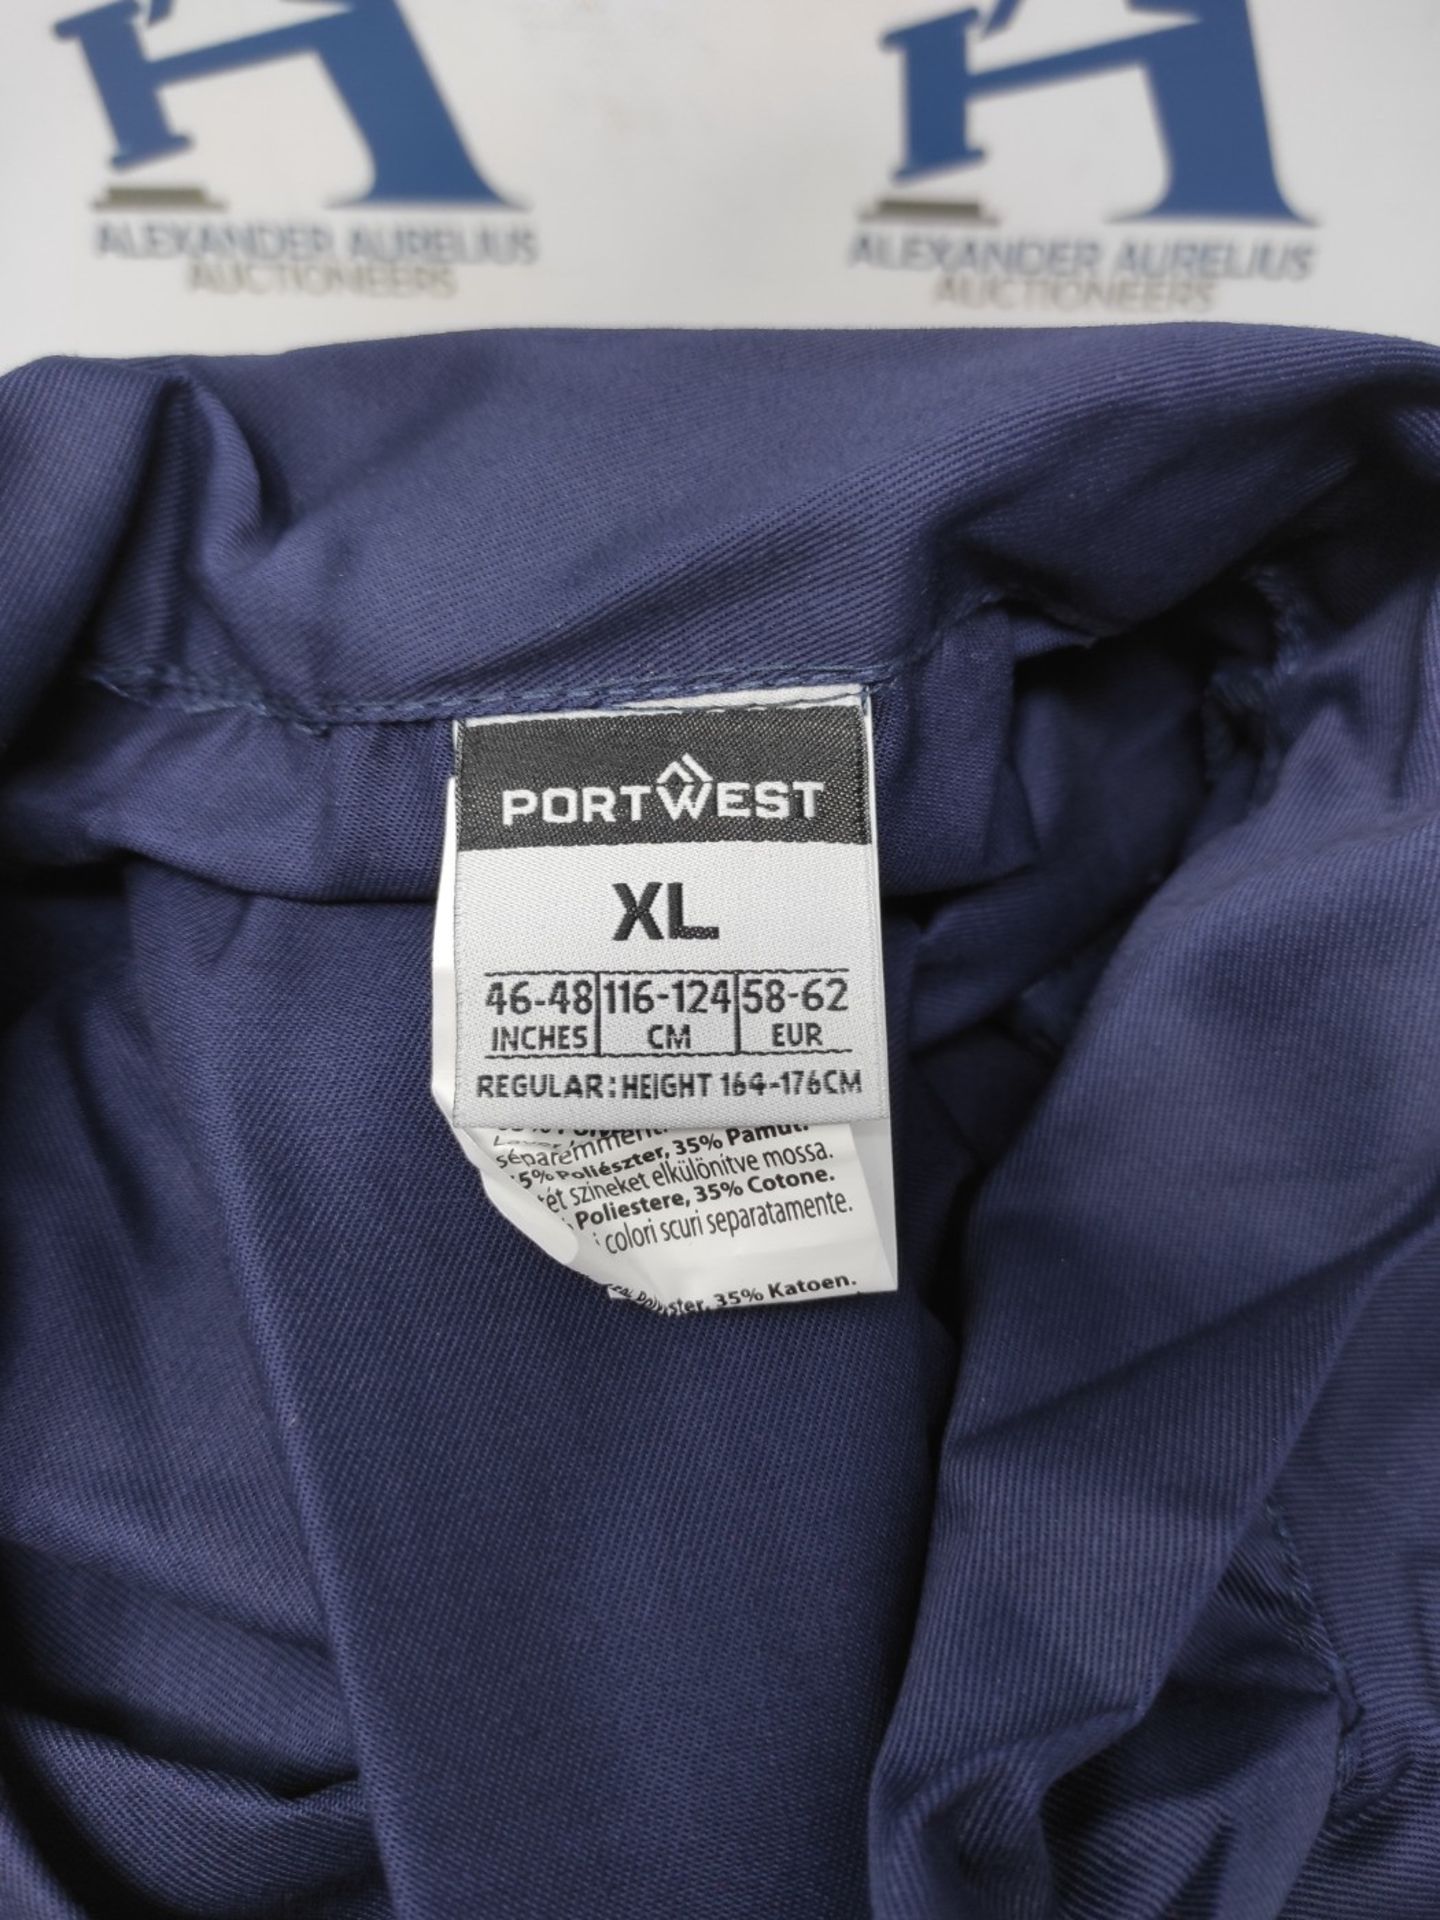 Portwest S999 Men's Euro Workwear Polycotton Coverall Boiler Suit Overalls Navy, XL - Image 3 of 3